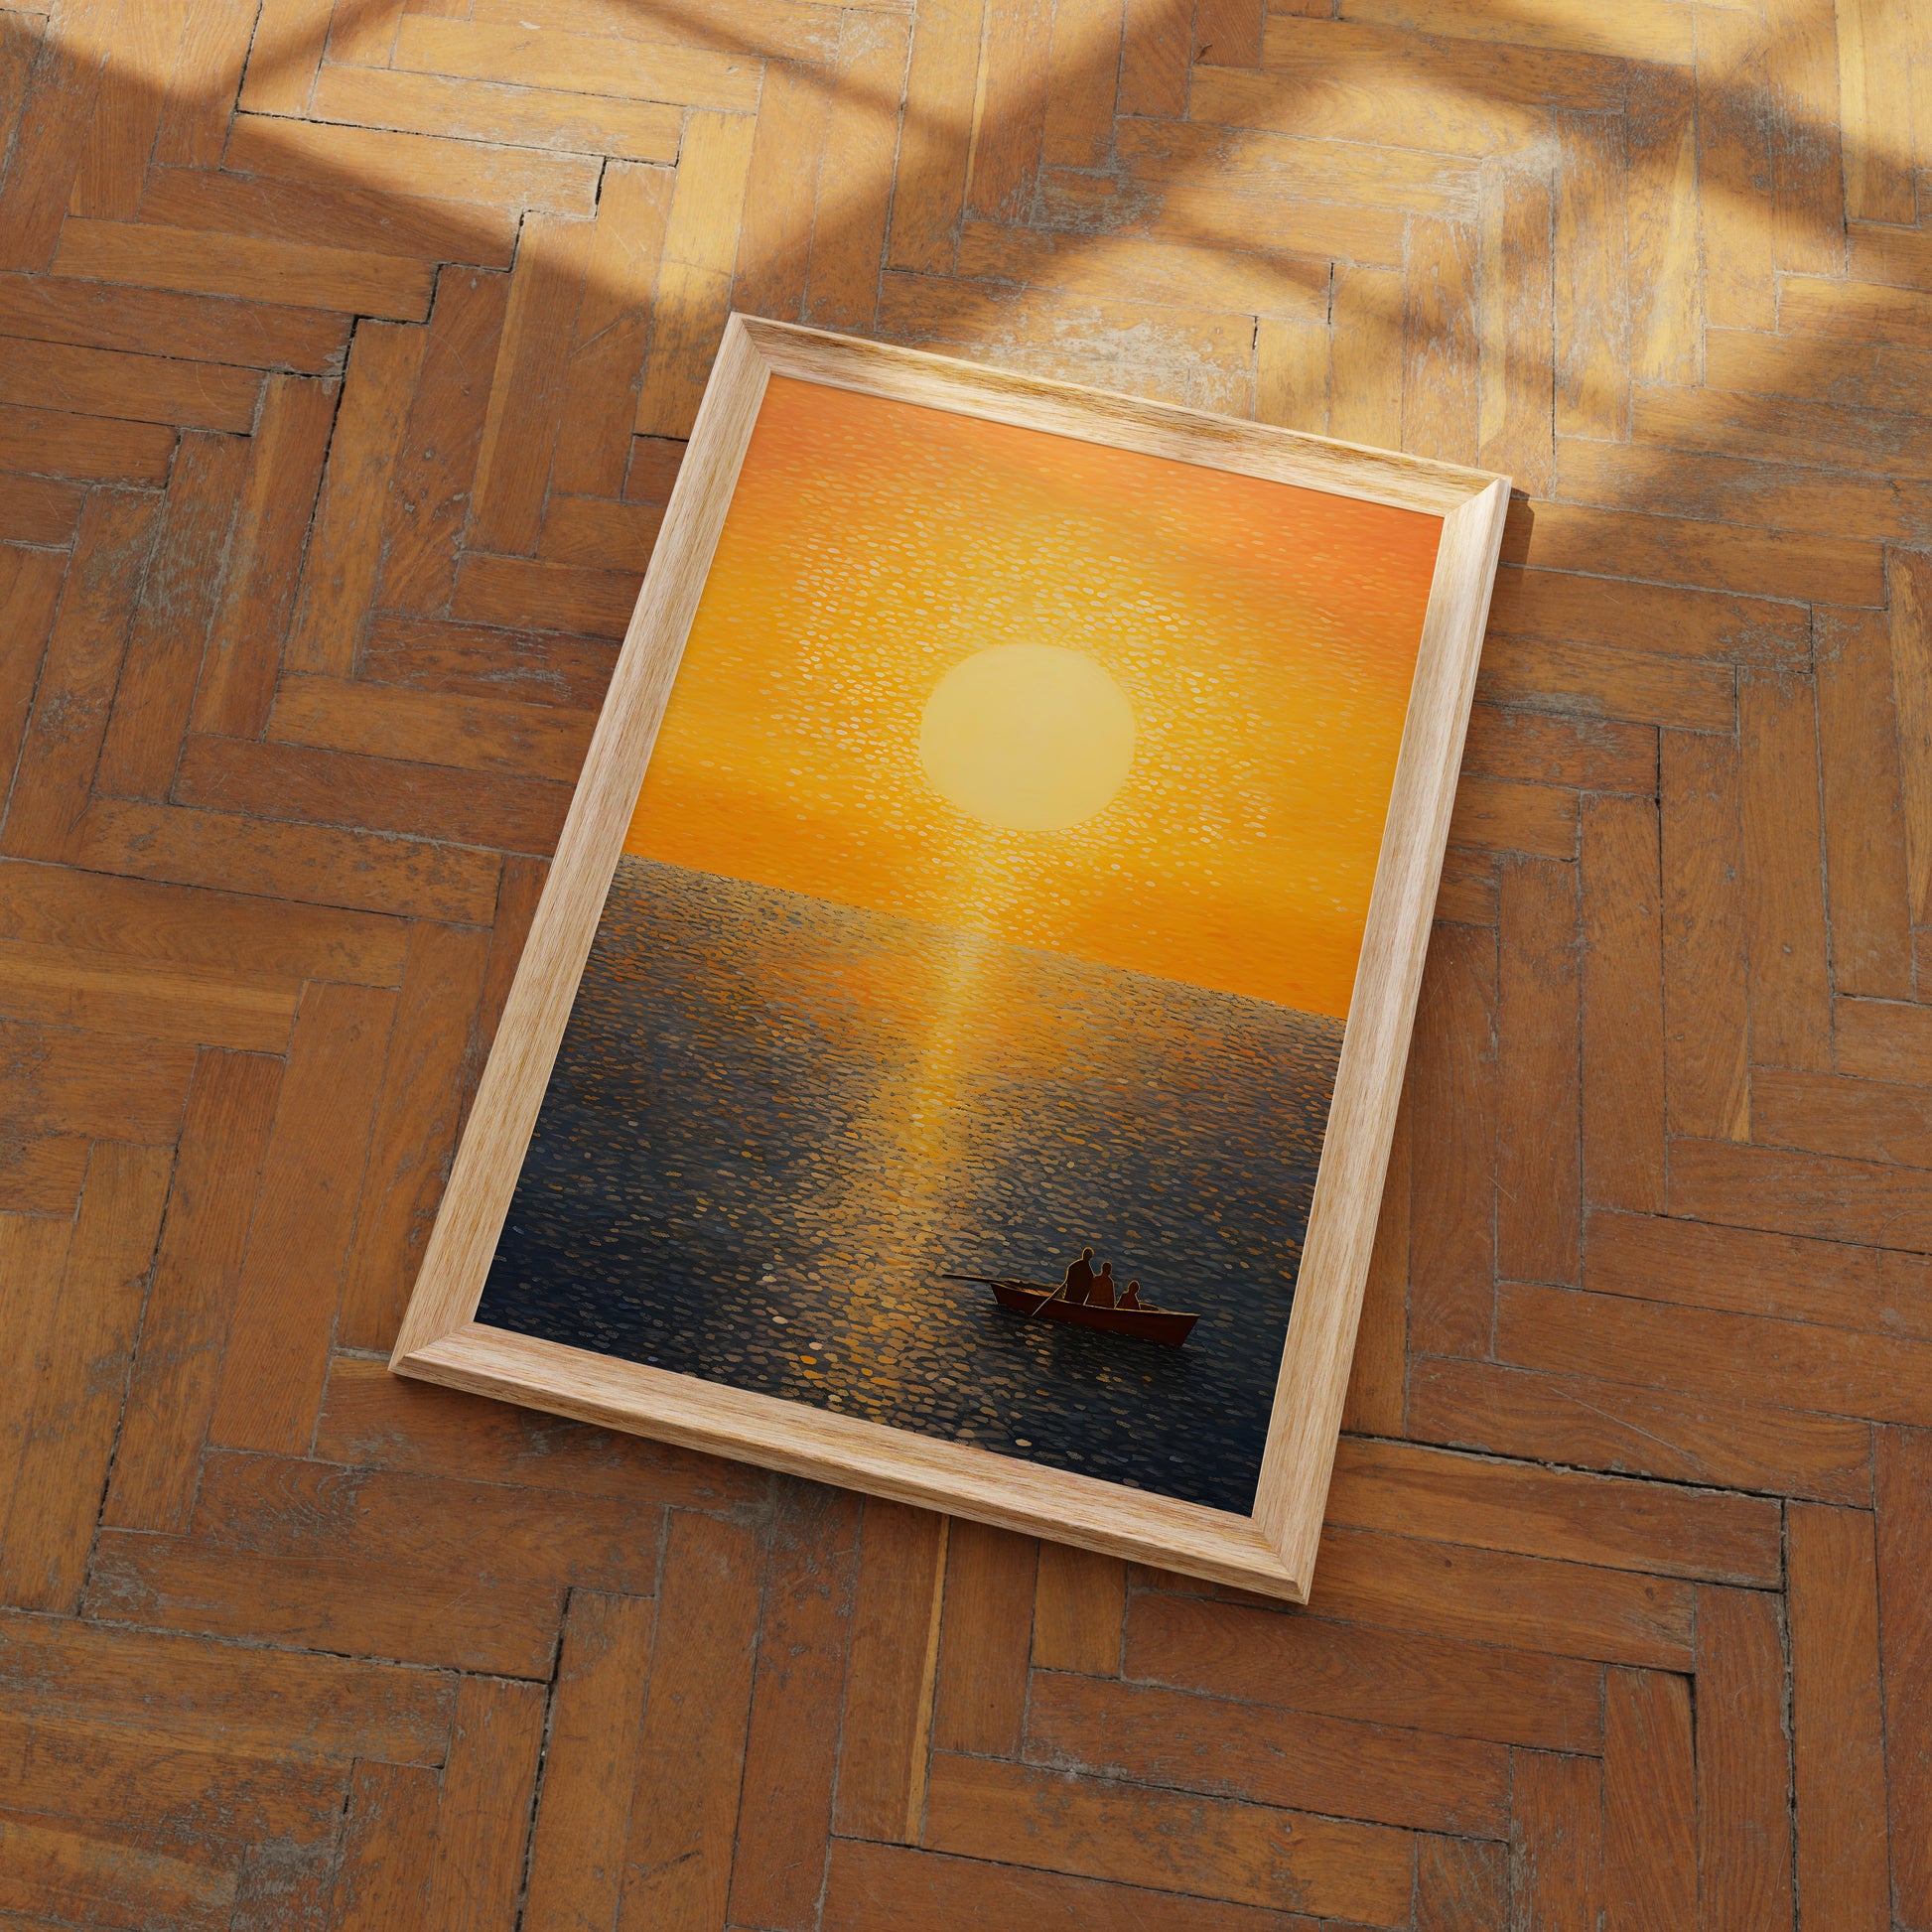 A framed painting of a sunset over the sea with a boat on a parquet floor.